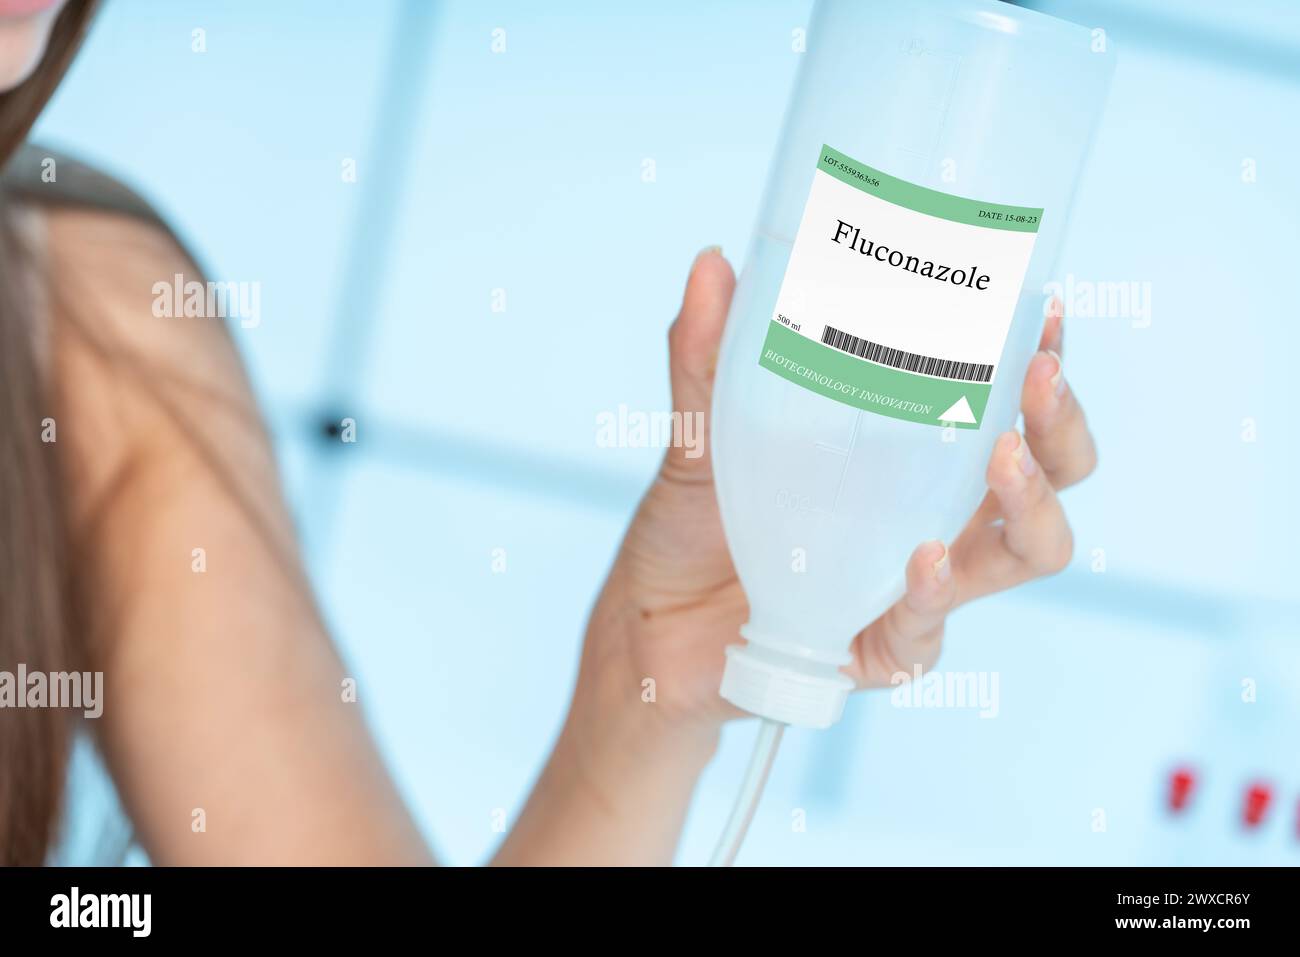 Fluconazole intravenous solution, conceptual image. An antifungal medication used to treat fungal infections. Stock Photo